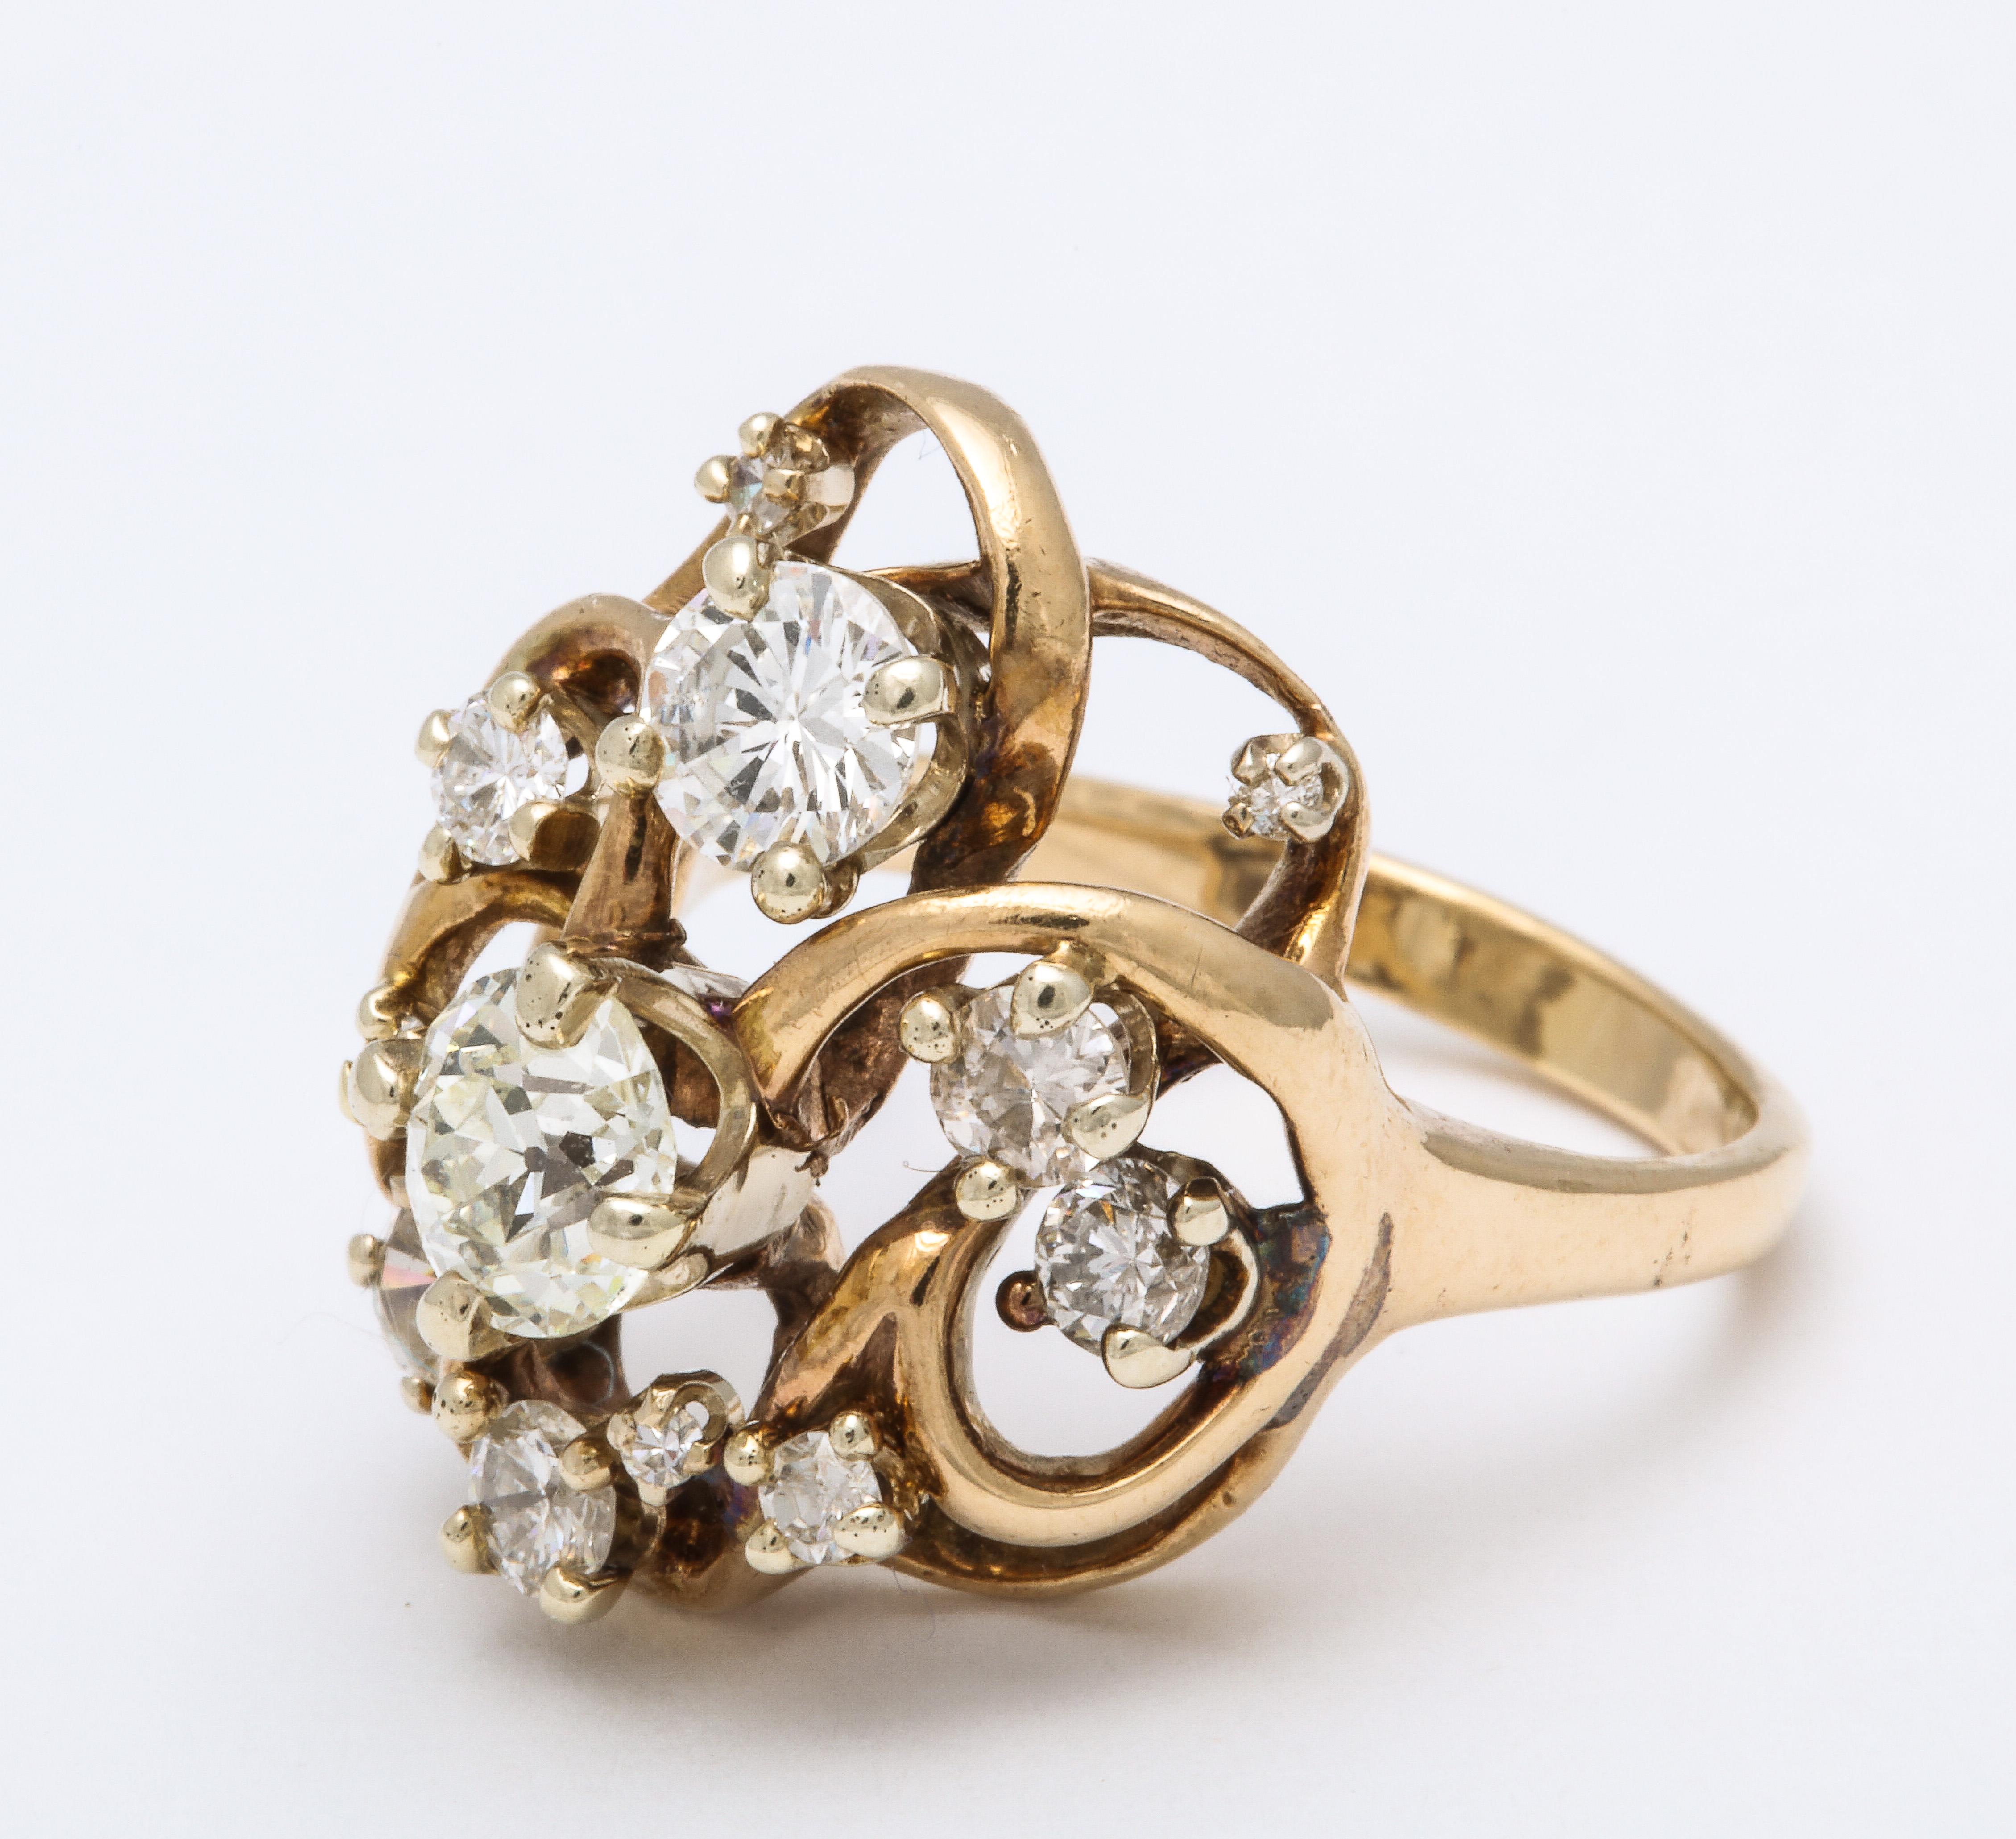 A wonderful cluster of mine-cut diamonds swirl around a center larger stone. Set in a gold open work mounting, this ,ring has a modern look but a vintage piece.